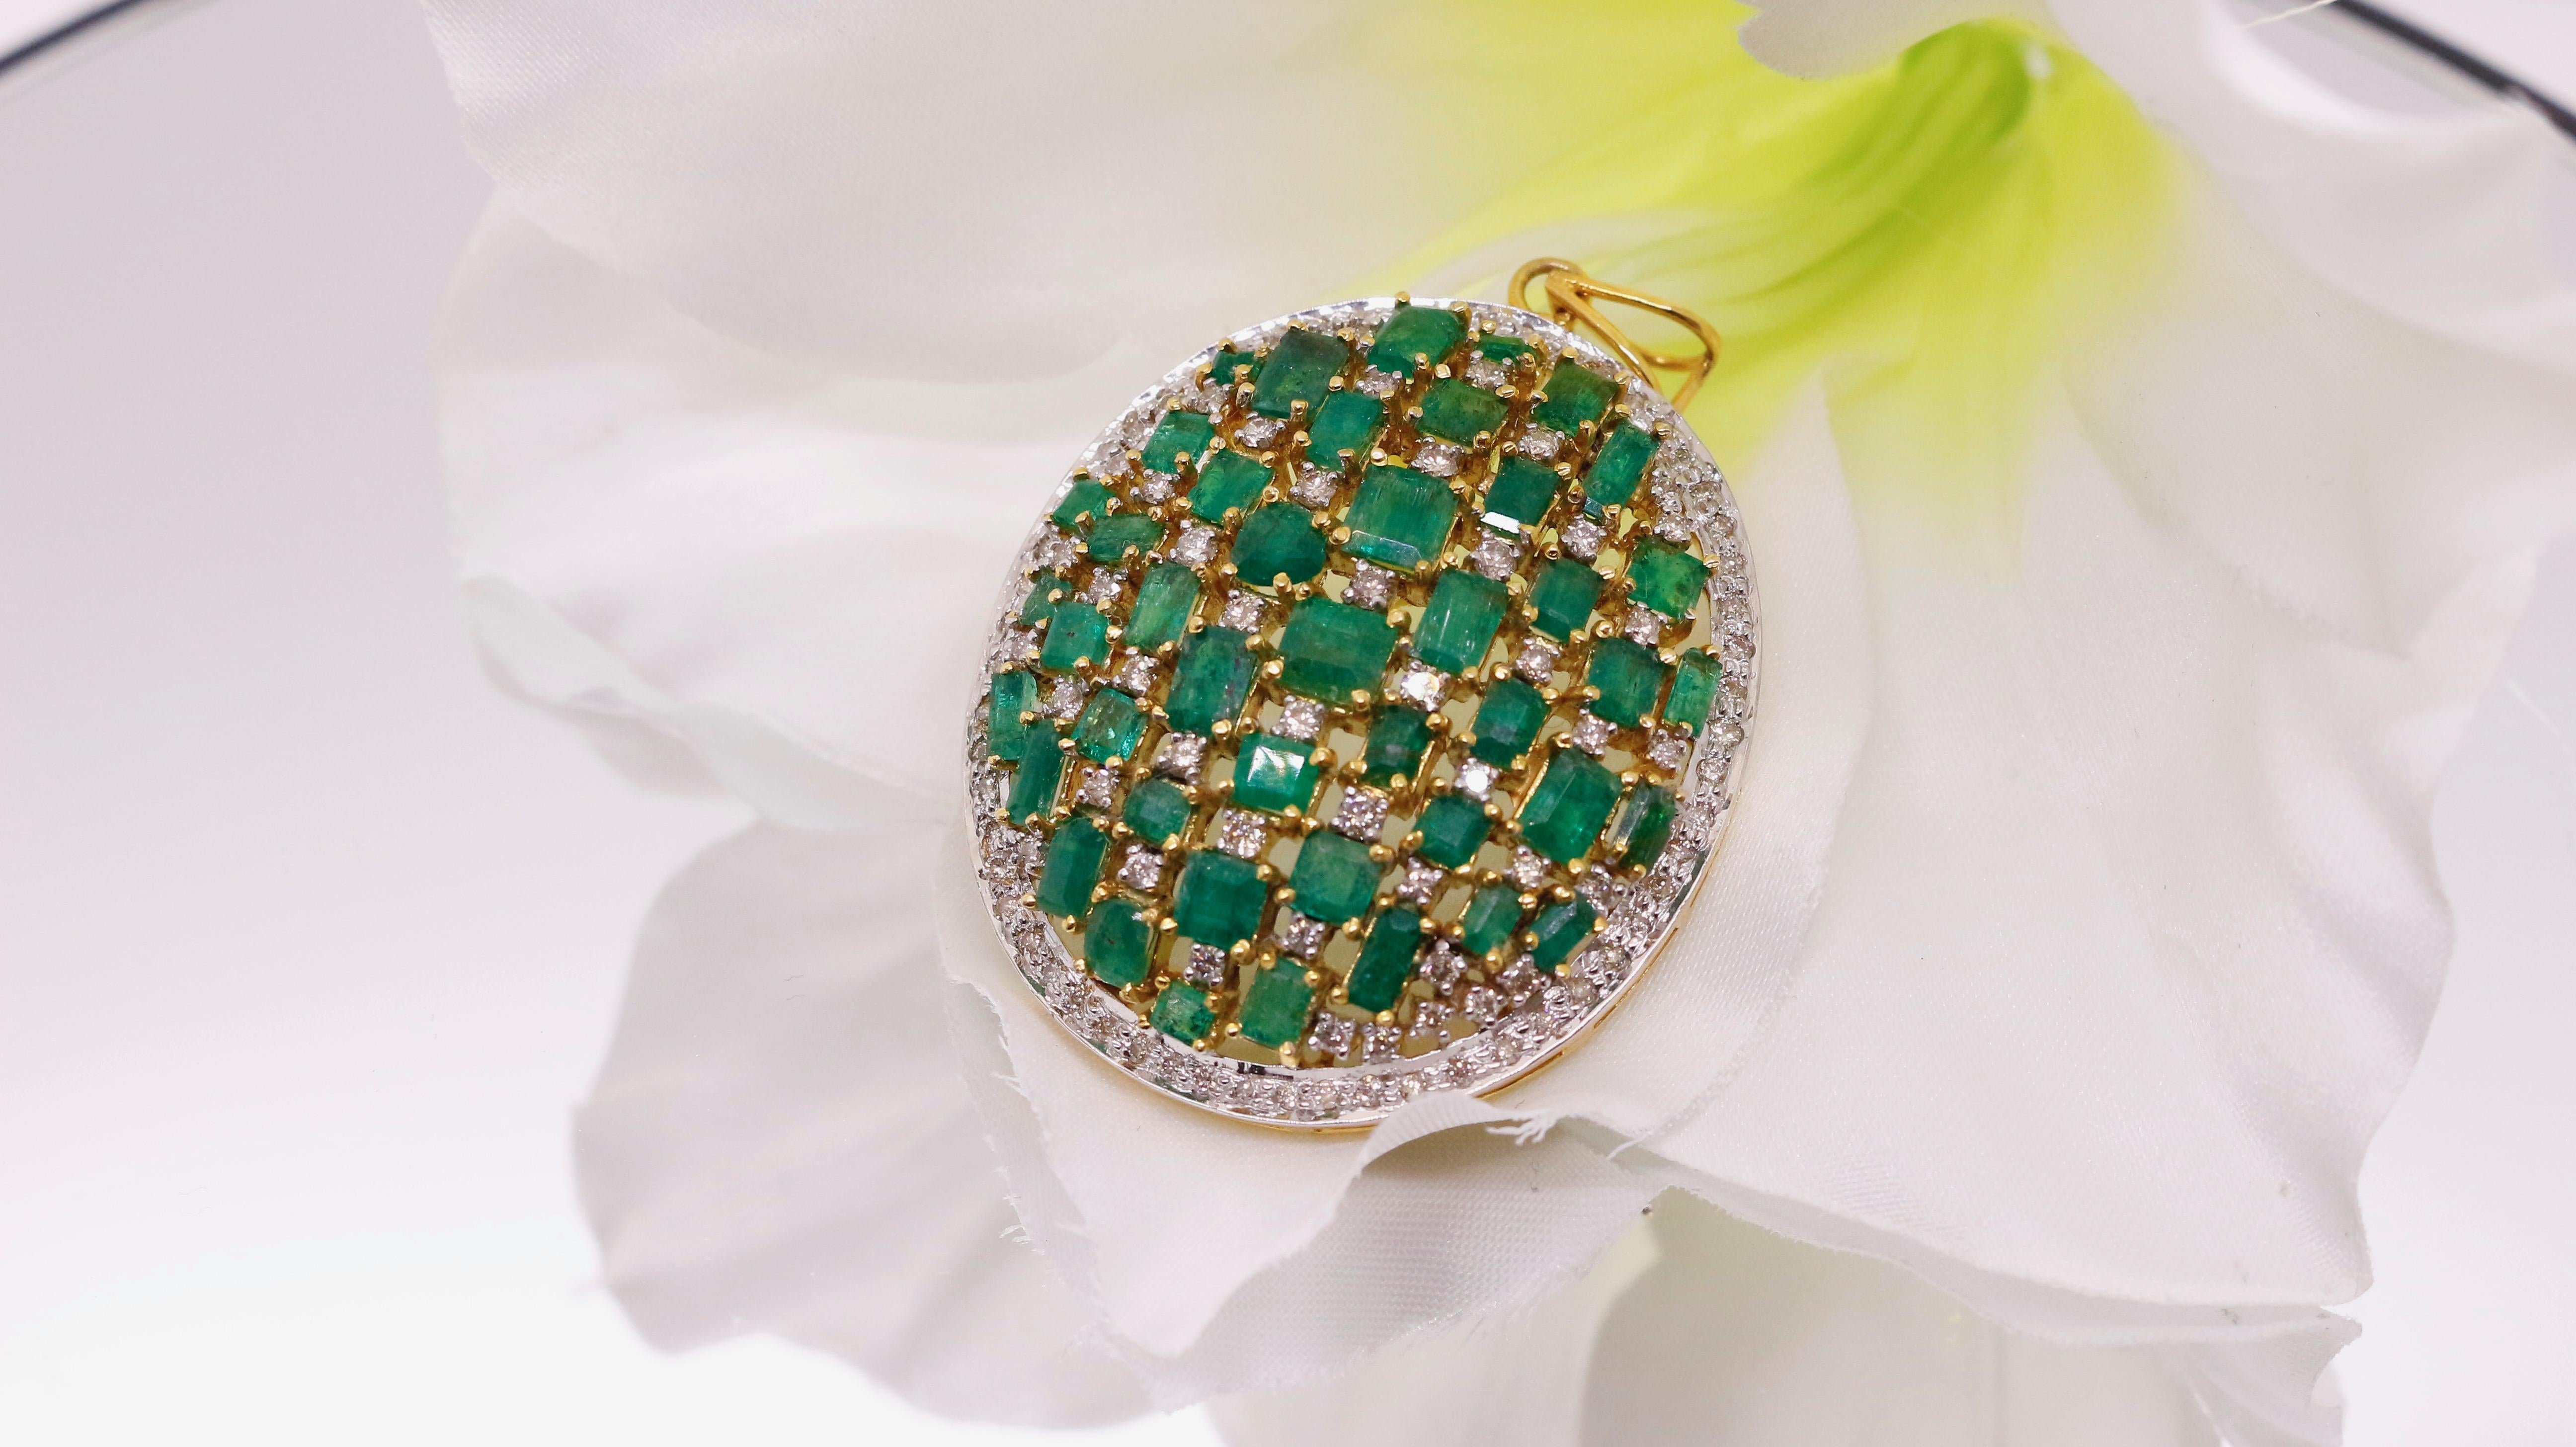 Introducing our exquisite Turtle Back Shaped Emerald Pendant, a stunning vintage-style piece meticulously handcrafted in 14kt gold. This pendant captures the essence of timeless beauty and showcases the unique allure of turtle back-shaped